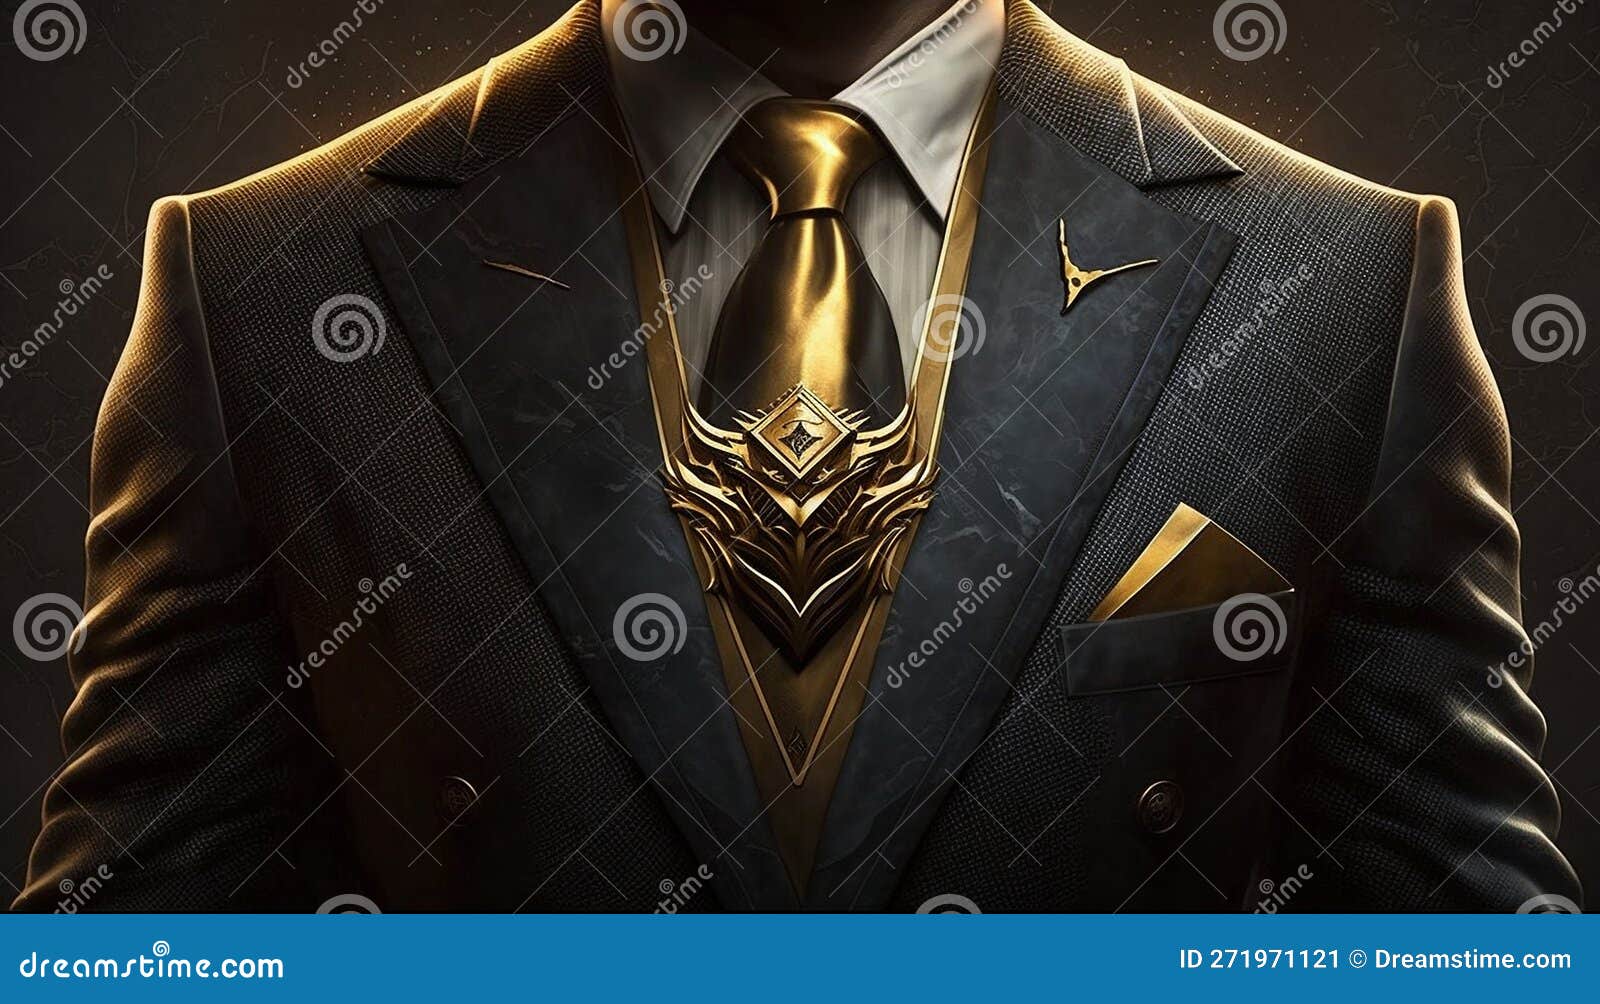 The Elegance of Wealth: a Close-Up Silhouette of a Rich Businessman in ...